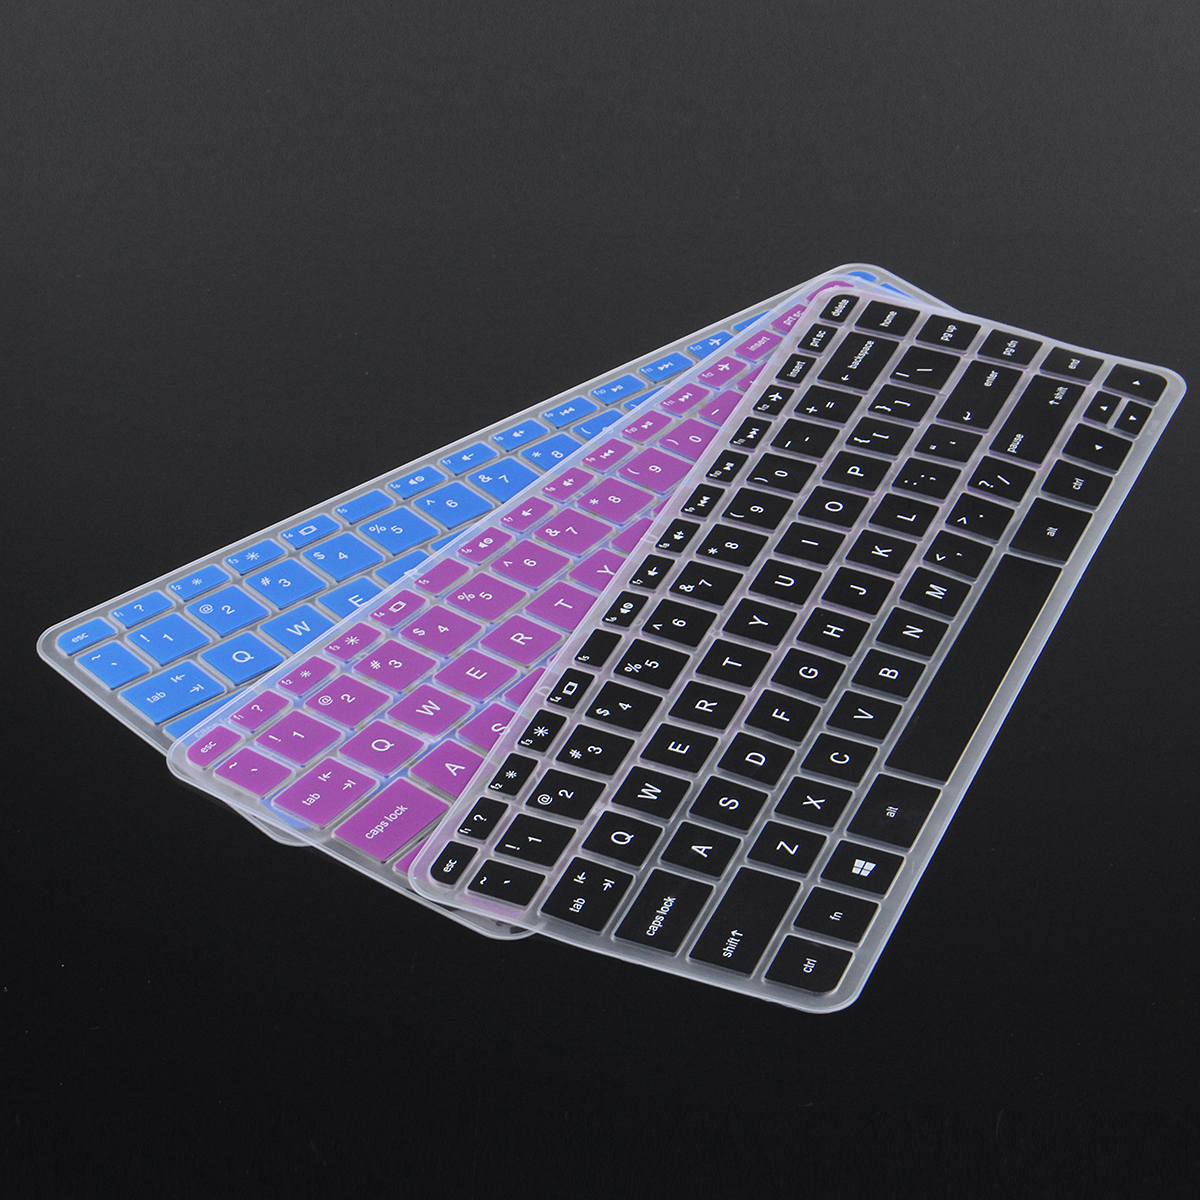 13.3 Inch Silicone Keyboard Protector Cover for HP Pavilion X360 14